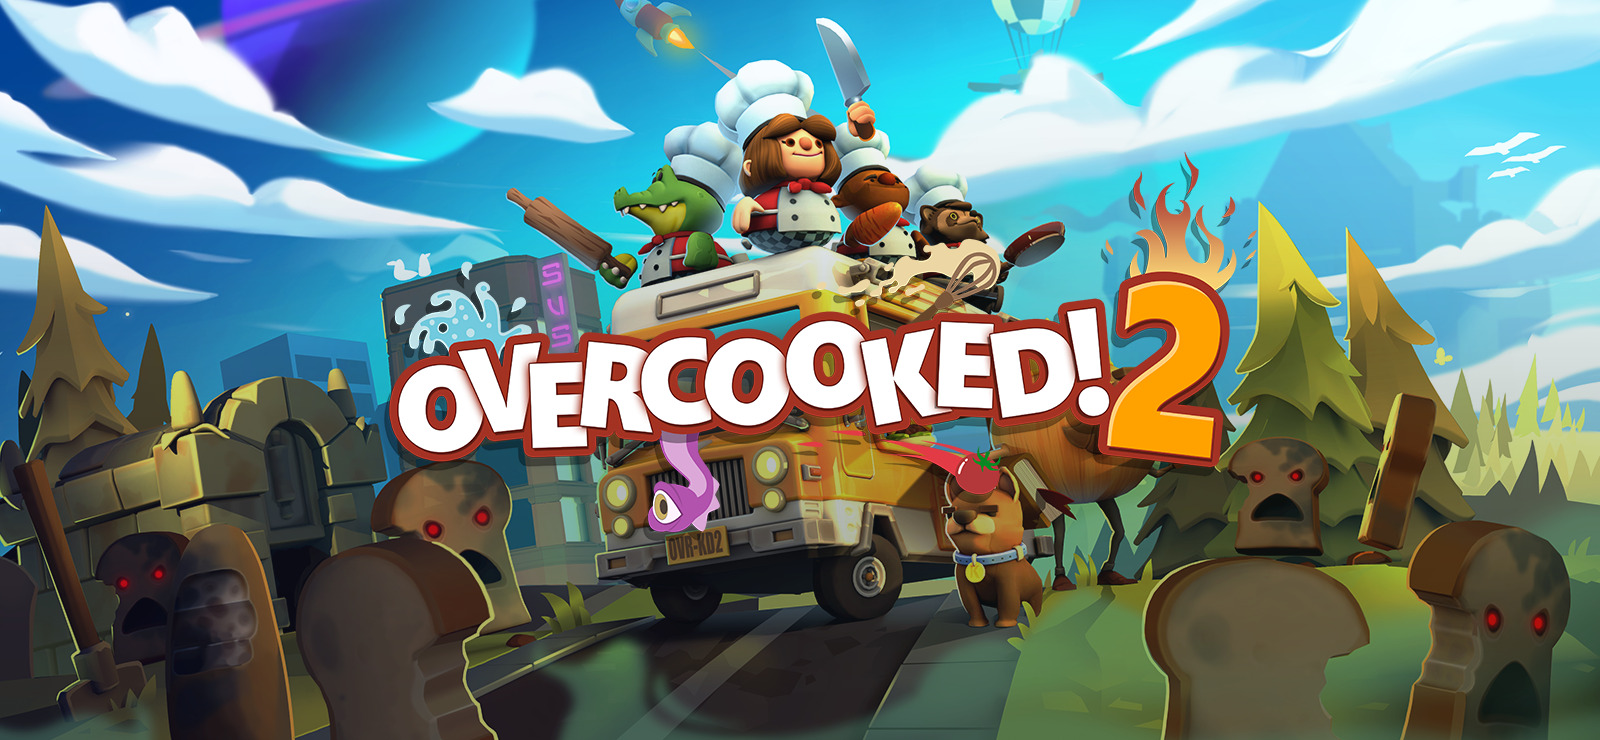 Overcooked! All You Can Eat Critic Reviews - OpenCritic